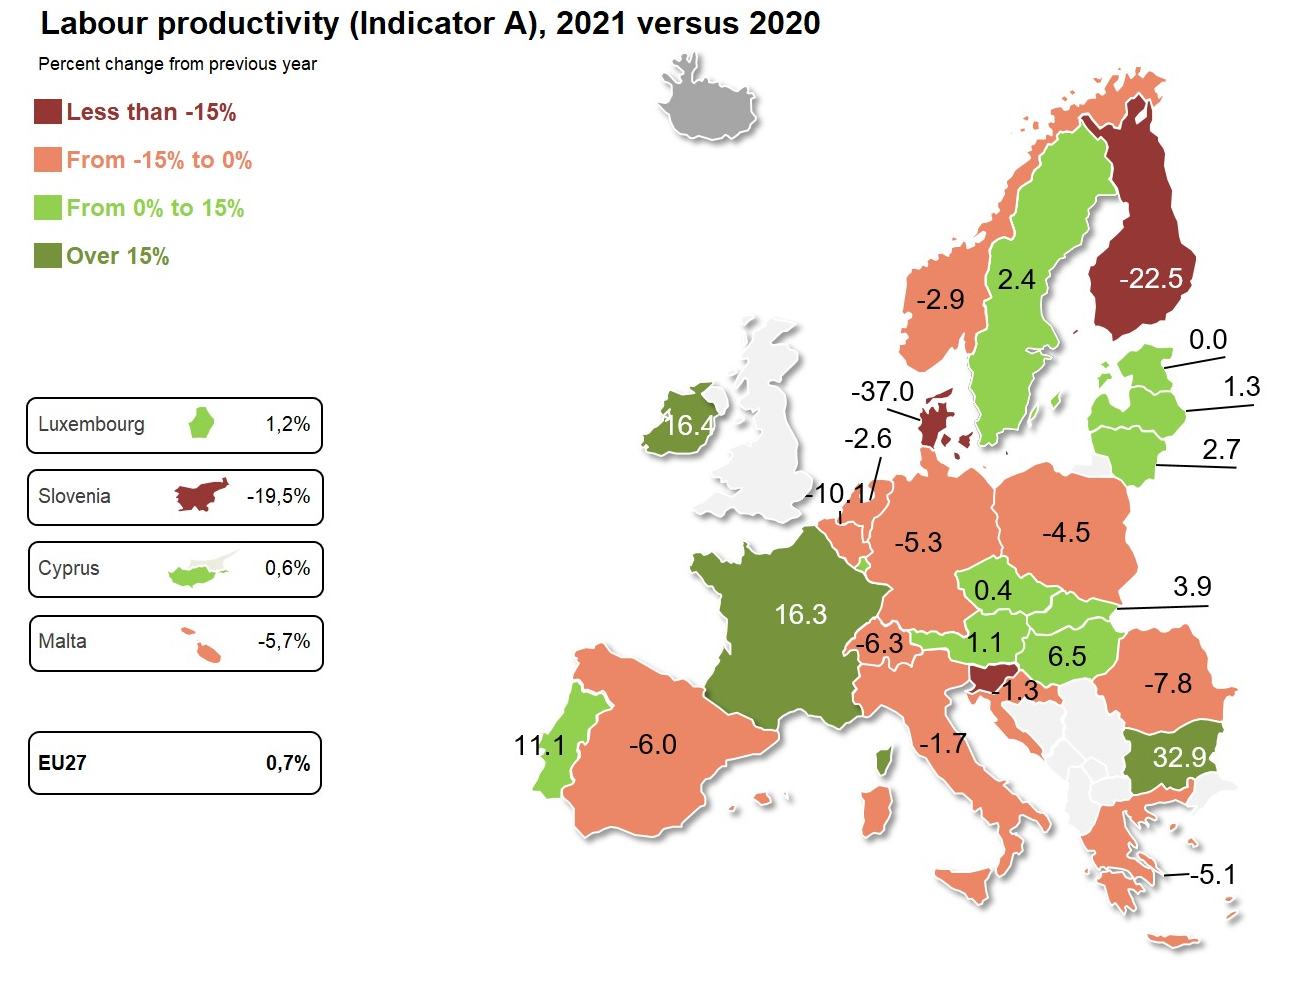 Map: Labour productivity (Indicator A), 2021 versus 2020, percentage change from previousyear